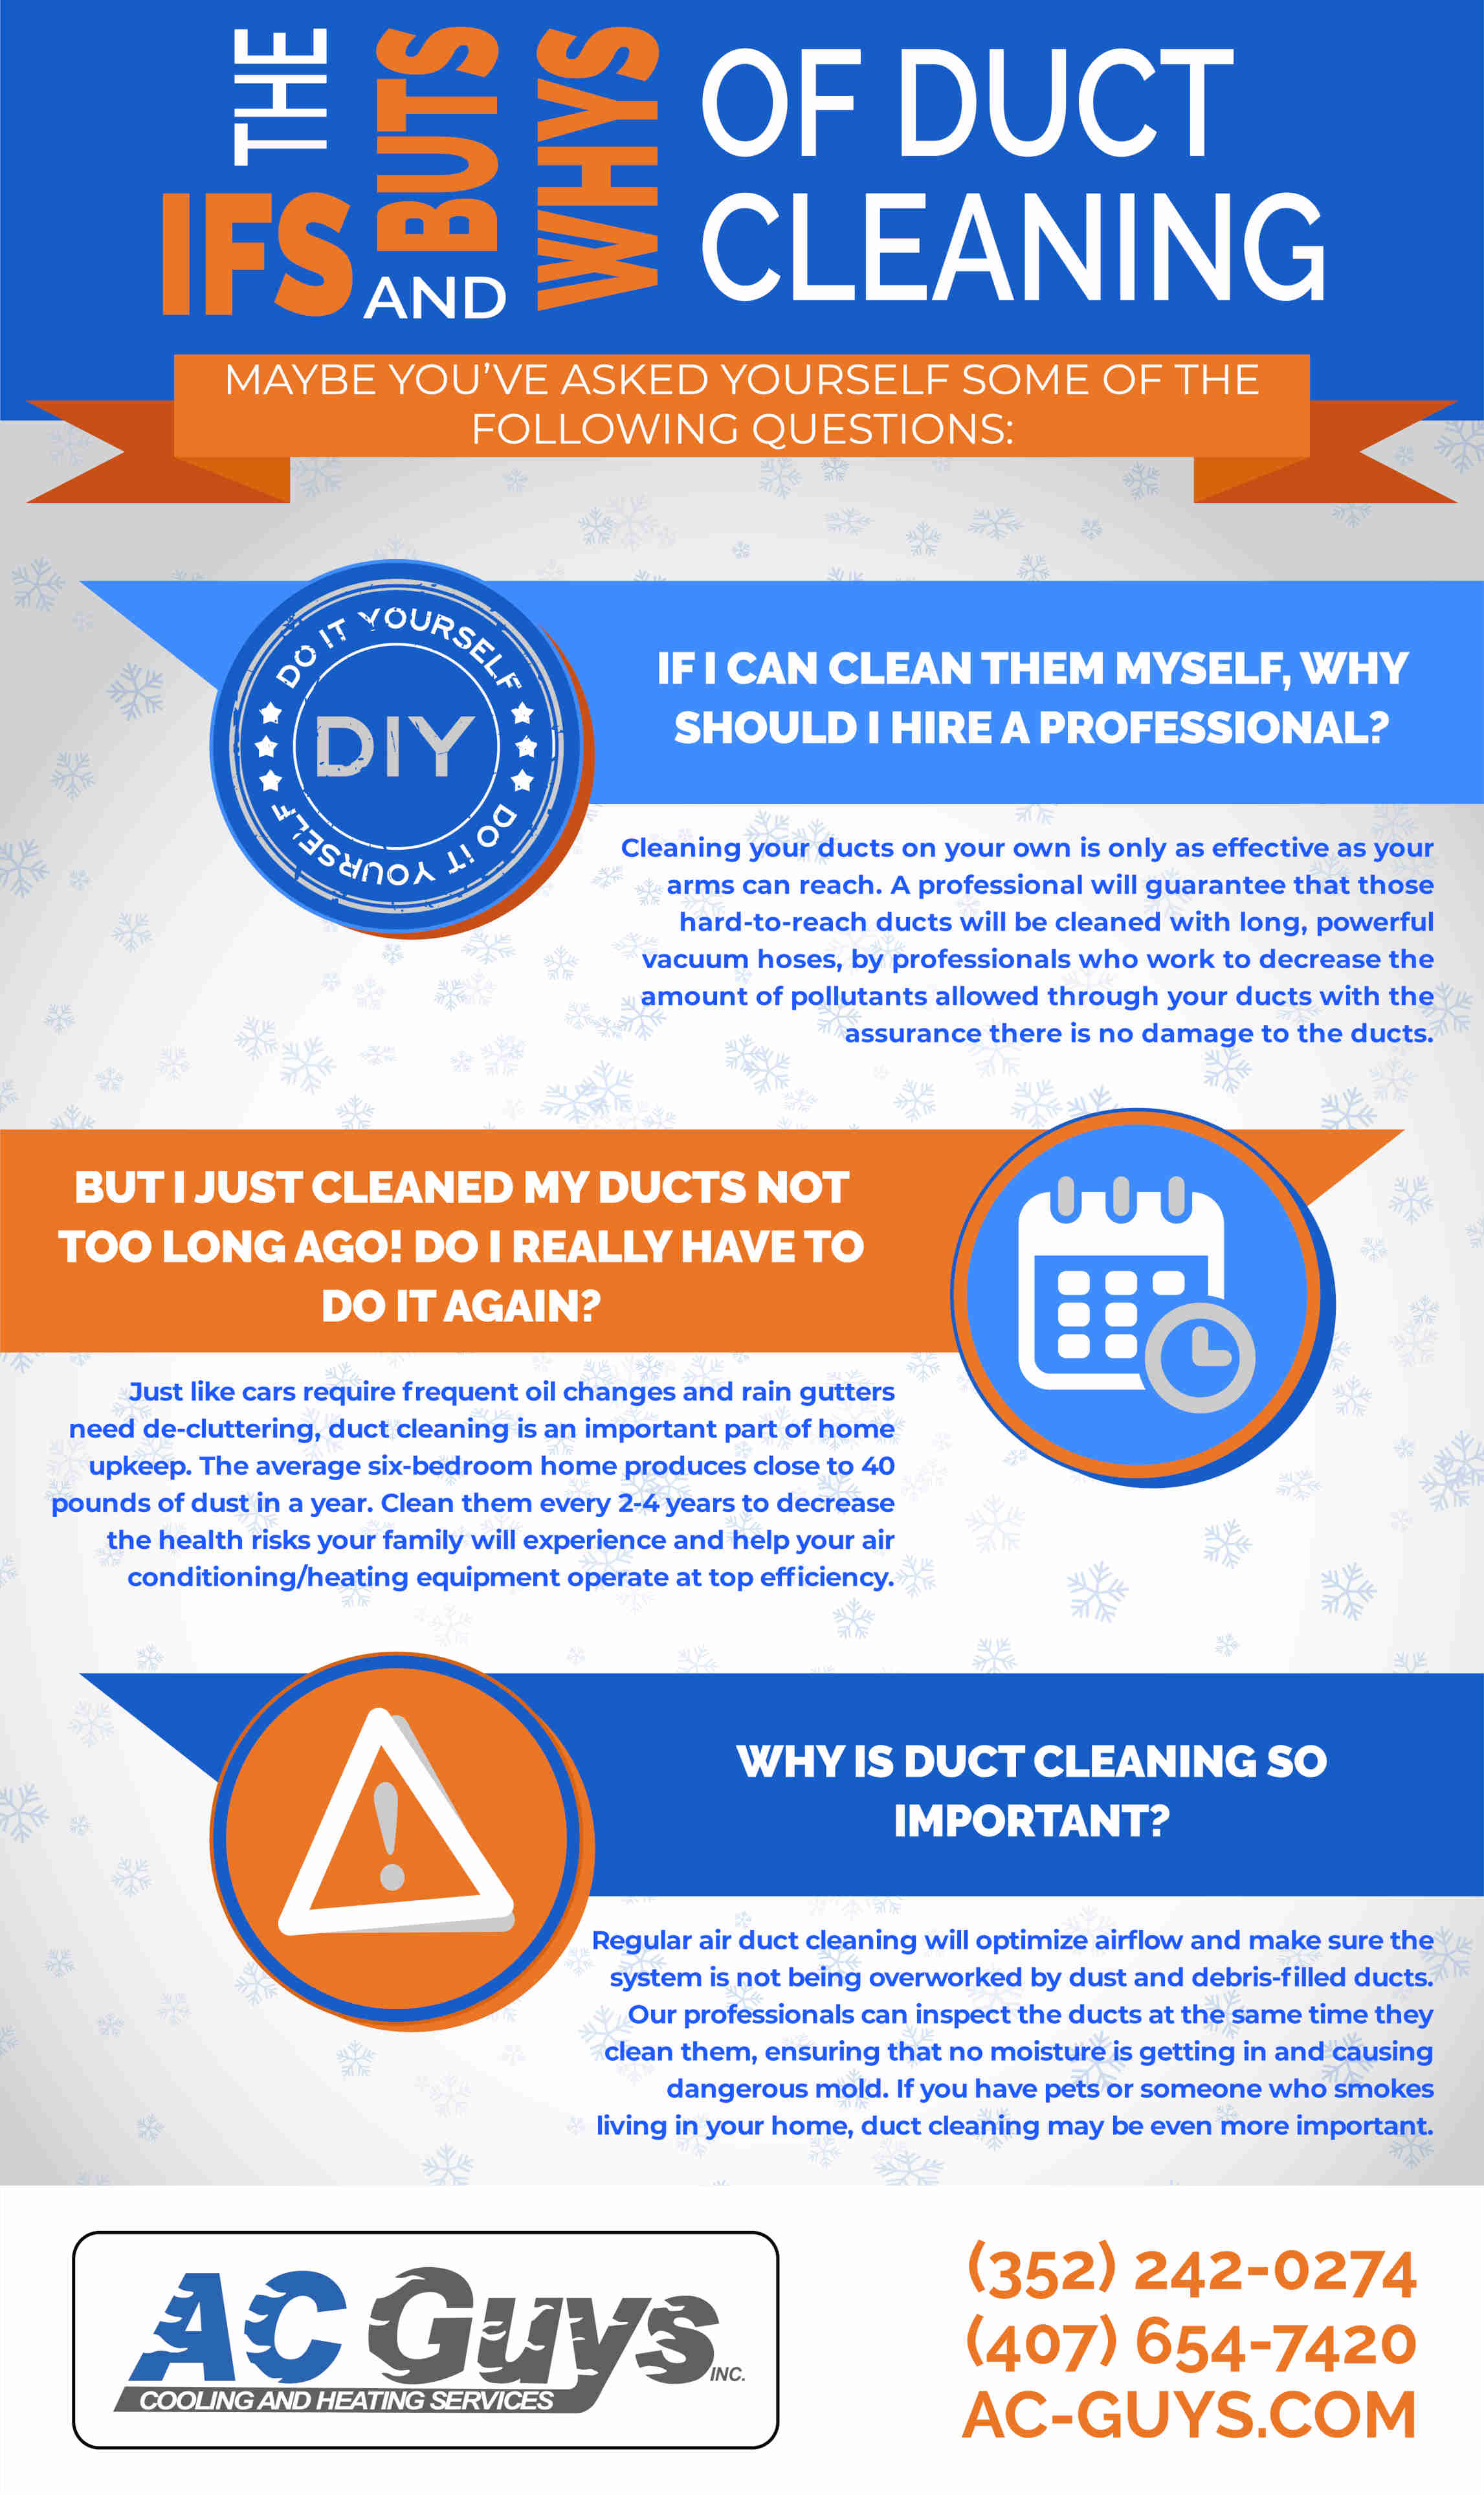 The IFS, BUTS, and WHYS of Duct Cleaning